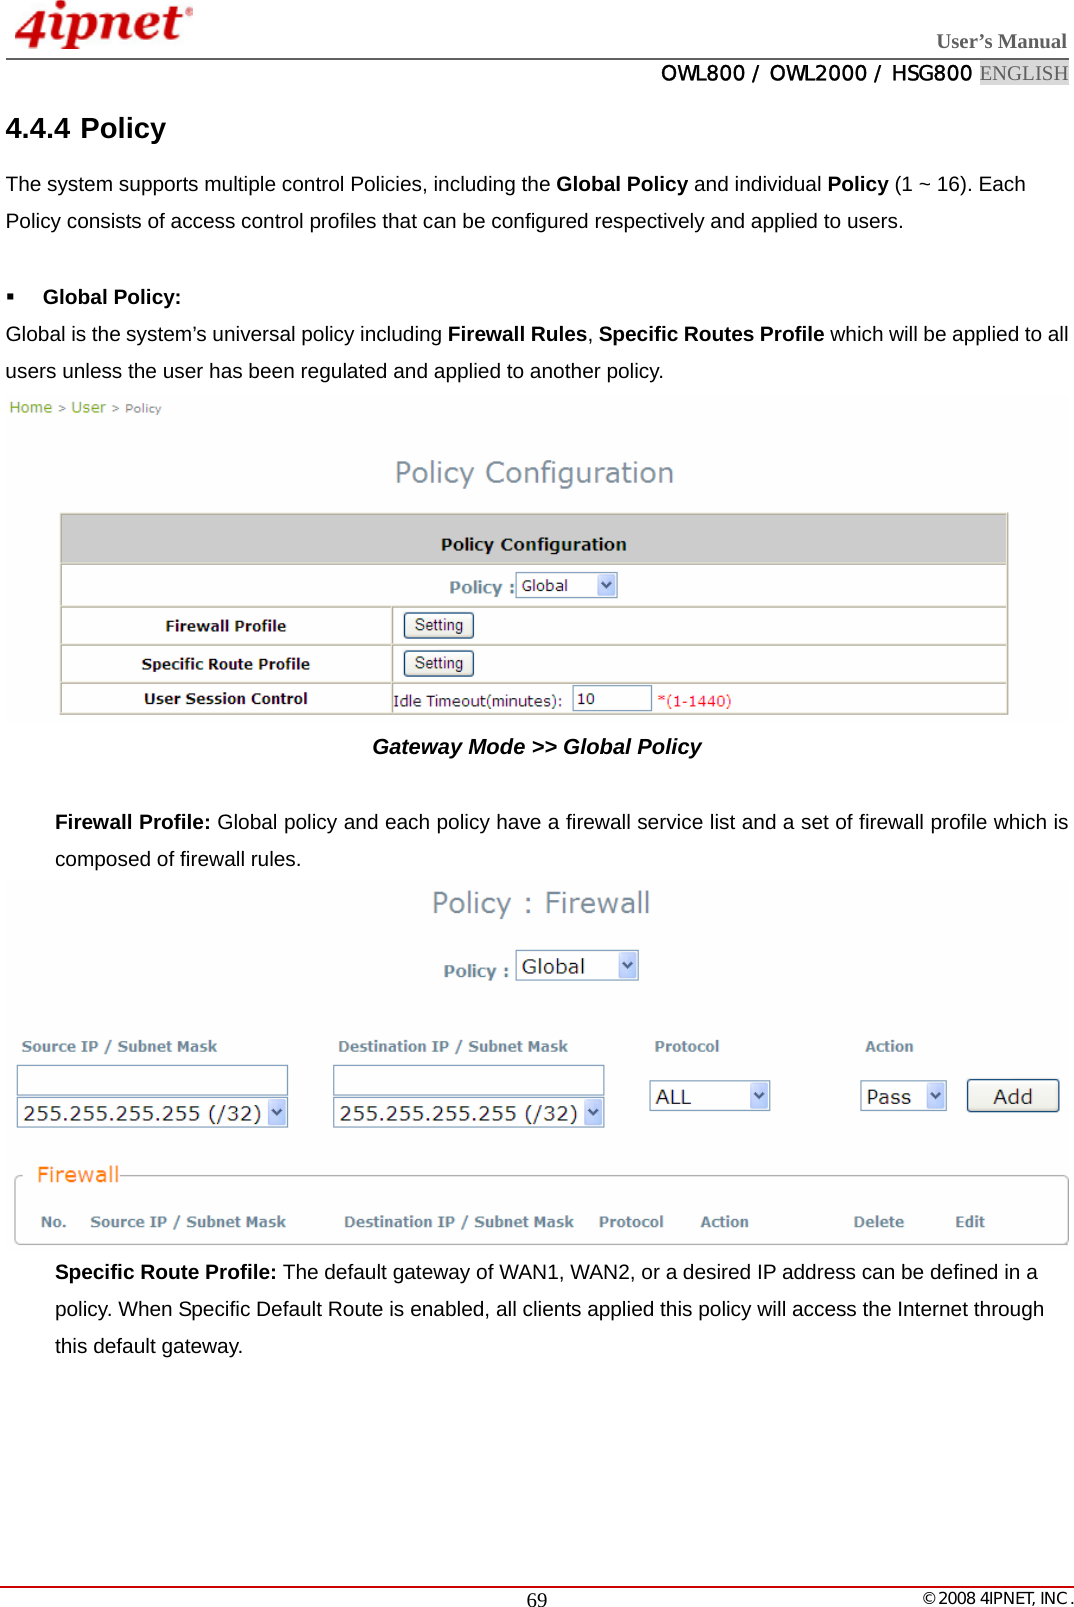  User’s Manual  OWL800 / OWL2000 / HSG800 ENGLISH   © 2008 4IPNET, INC.  694.4.4 Policy The system supports multiple control Policies, including the Global Policy and individual Policy (1 ~ 16). Each Policy consists of access control profiles that can be configured respectively and applied to users.   Global Policy:   Global is the system’s universal policy including Firewall Rules, Specific Routes Profile which will be applied to all users unless the user has been regulated and applied to another policy.  Gateway Mode &gt;&gt; Global Policy   Firewall Profile: Global policy and each policy have a firewall service list and a set of firewall profile which is composed of firewall rules.  Specific Route Profile: The default gateway of WAN1, WAN2, or a desired IP address can be defined in a policy. When Specific Default Route is enabled, all clients applied this policy will access the Internet through this default gateway. 